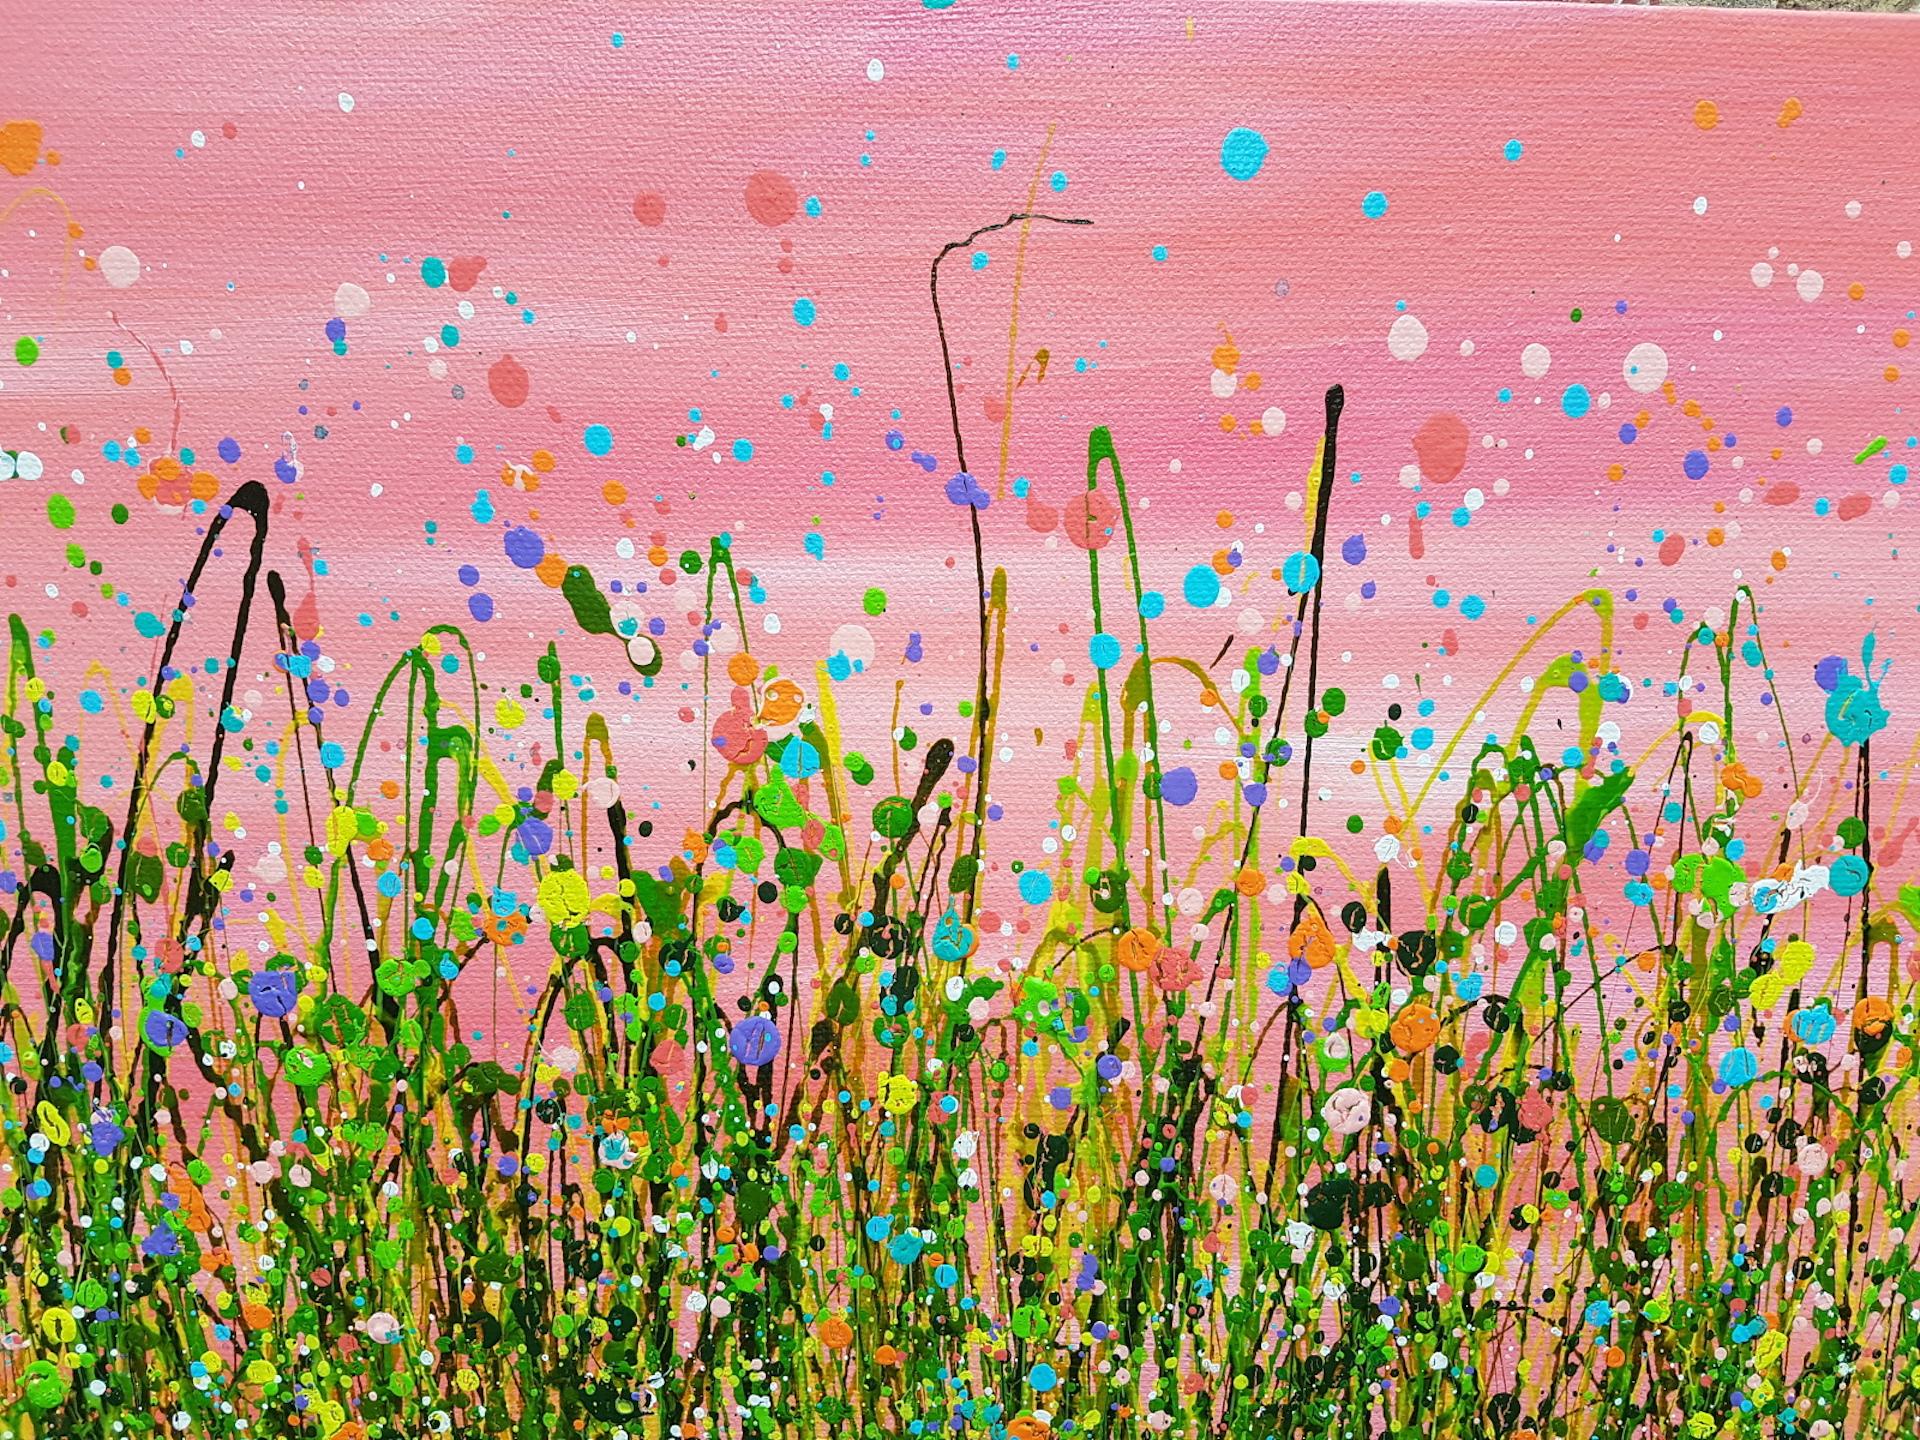 Lucy Moore
Flamingo Sky Meadows #3
Original Landscape Painting
Acrylic Paint on Canvas
Canvas Size: H 42 cm x W 59 cm x D 1.5 cm
Sold Unframed
Free Shipping
Please note that in situ images are purely an indication of how a piece may look.

Original